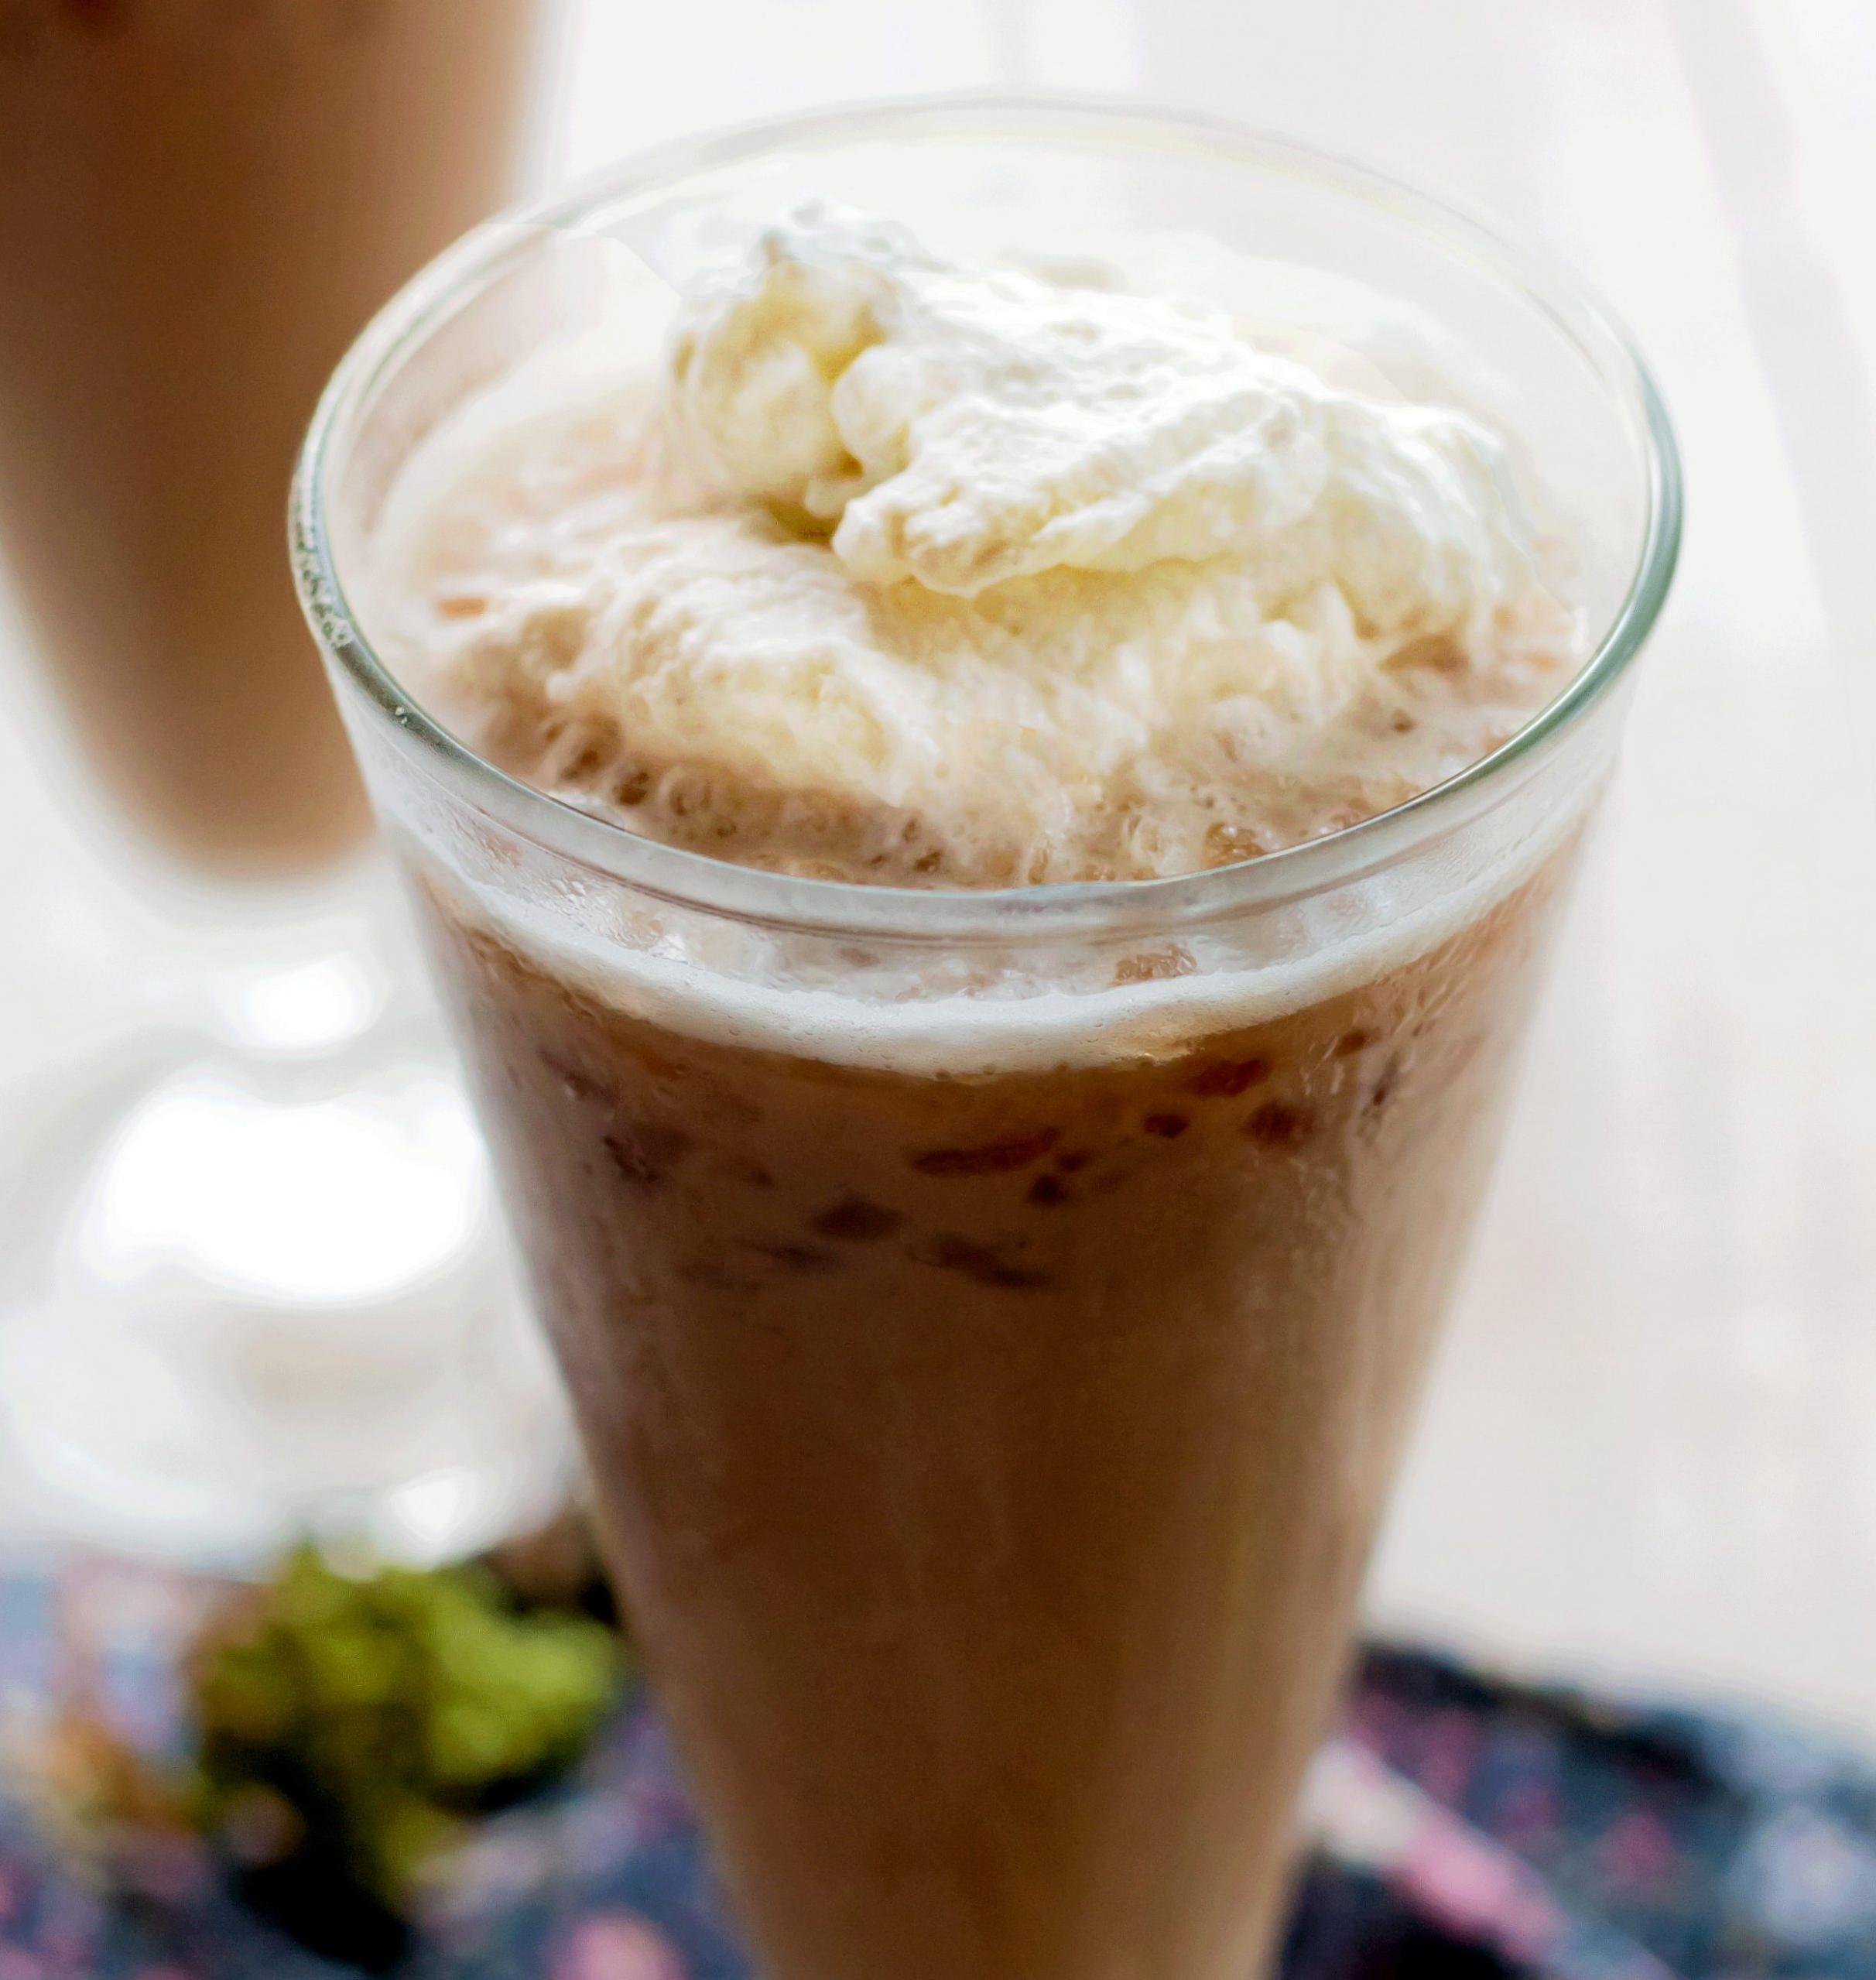  Get that easy-breezy feeling with a cup of this iced hazelnut coffee cooler.